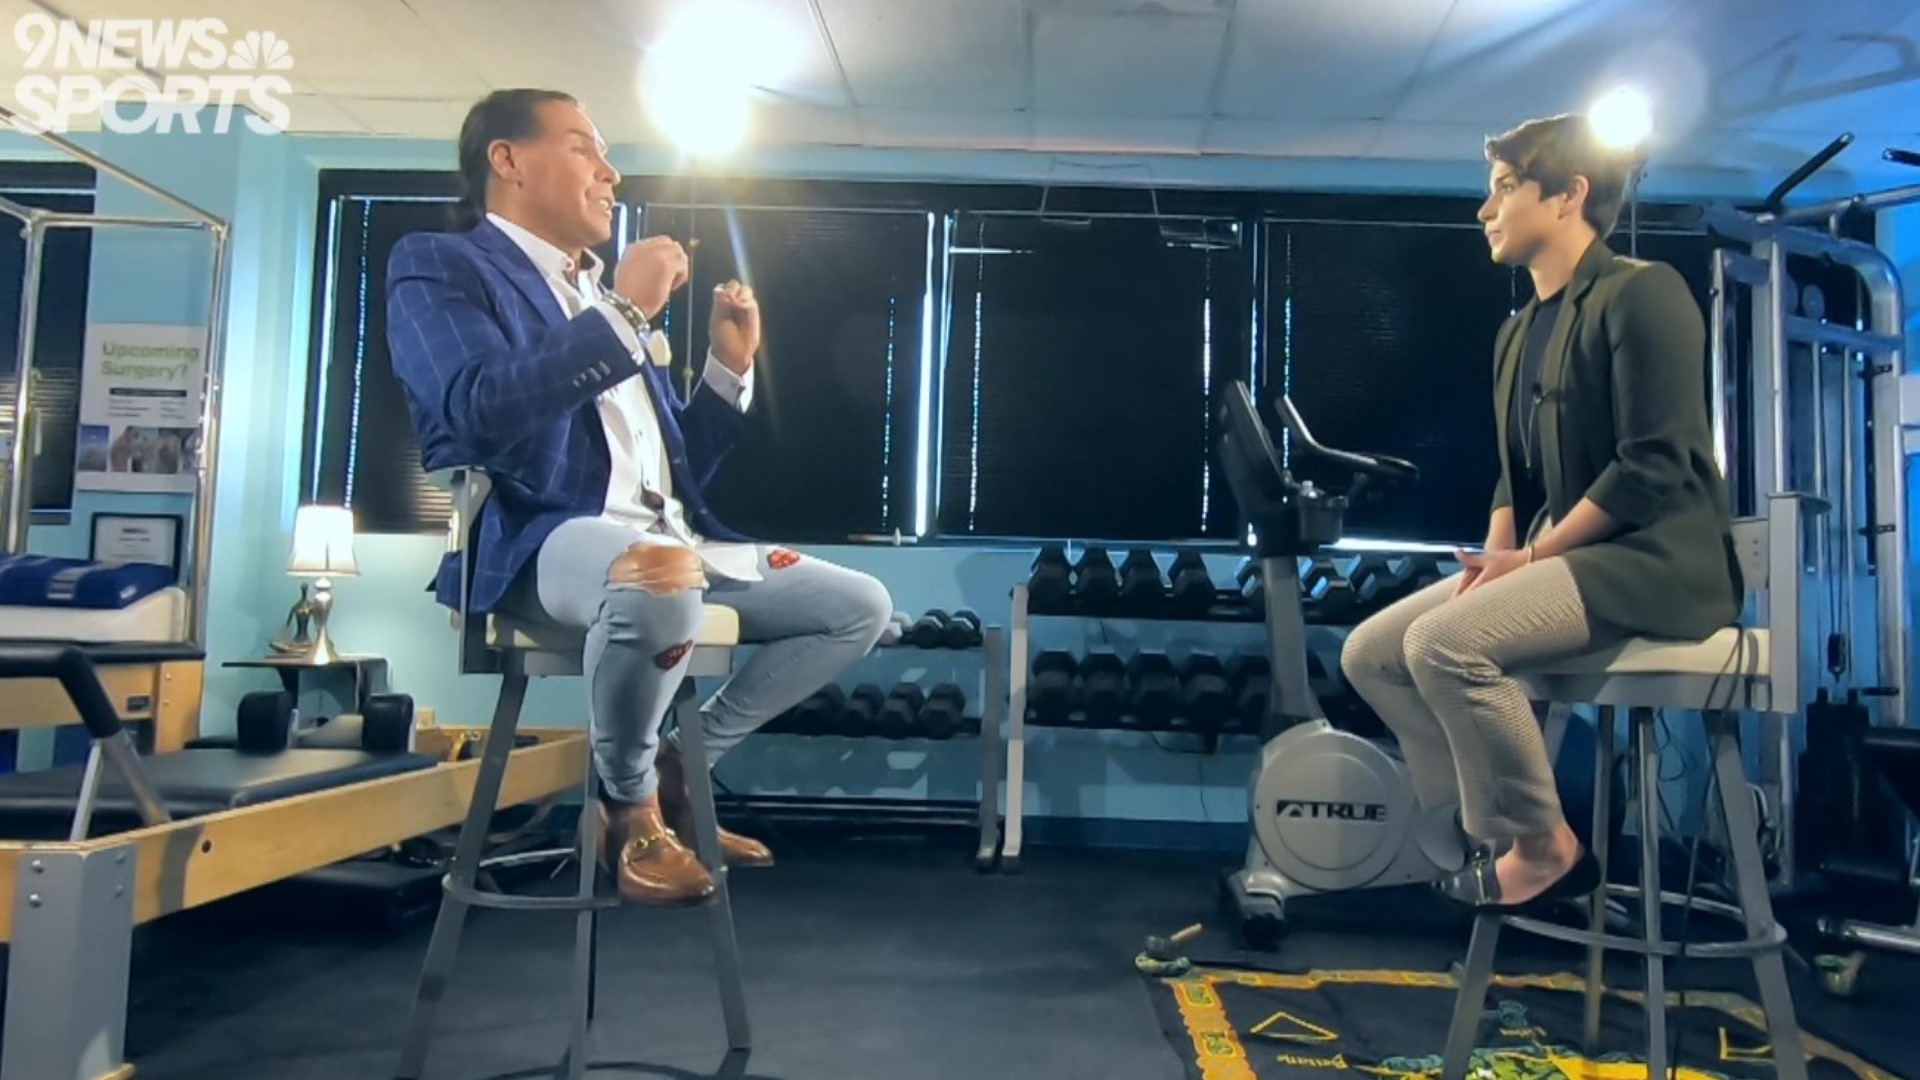 Dr. Rick Perea, Ph.D. is a well-known Sports Performance Psychologist based in Denver and sat down with 9NEWS' Arielle Orsuto to discuss Lock, Bridgewater and "D.T."